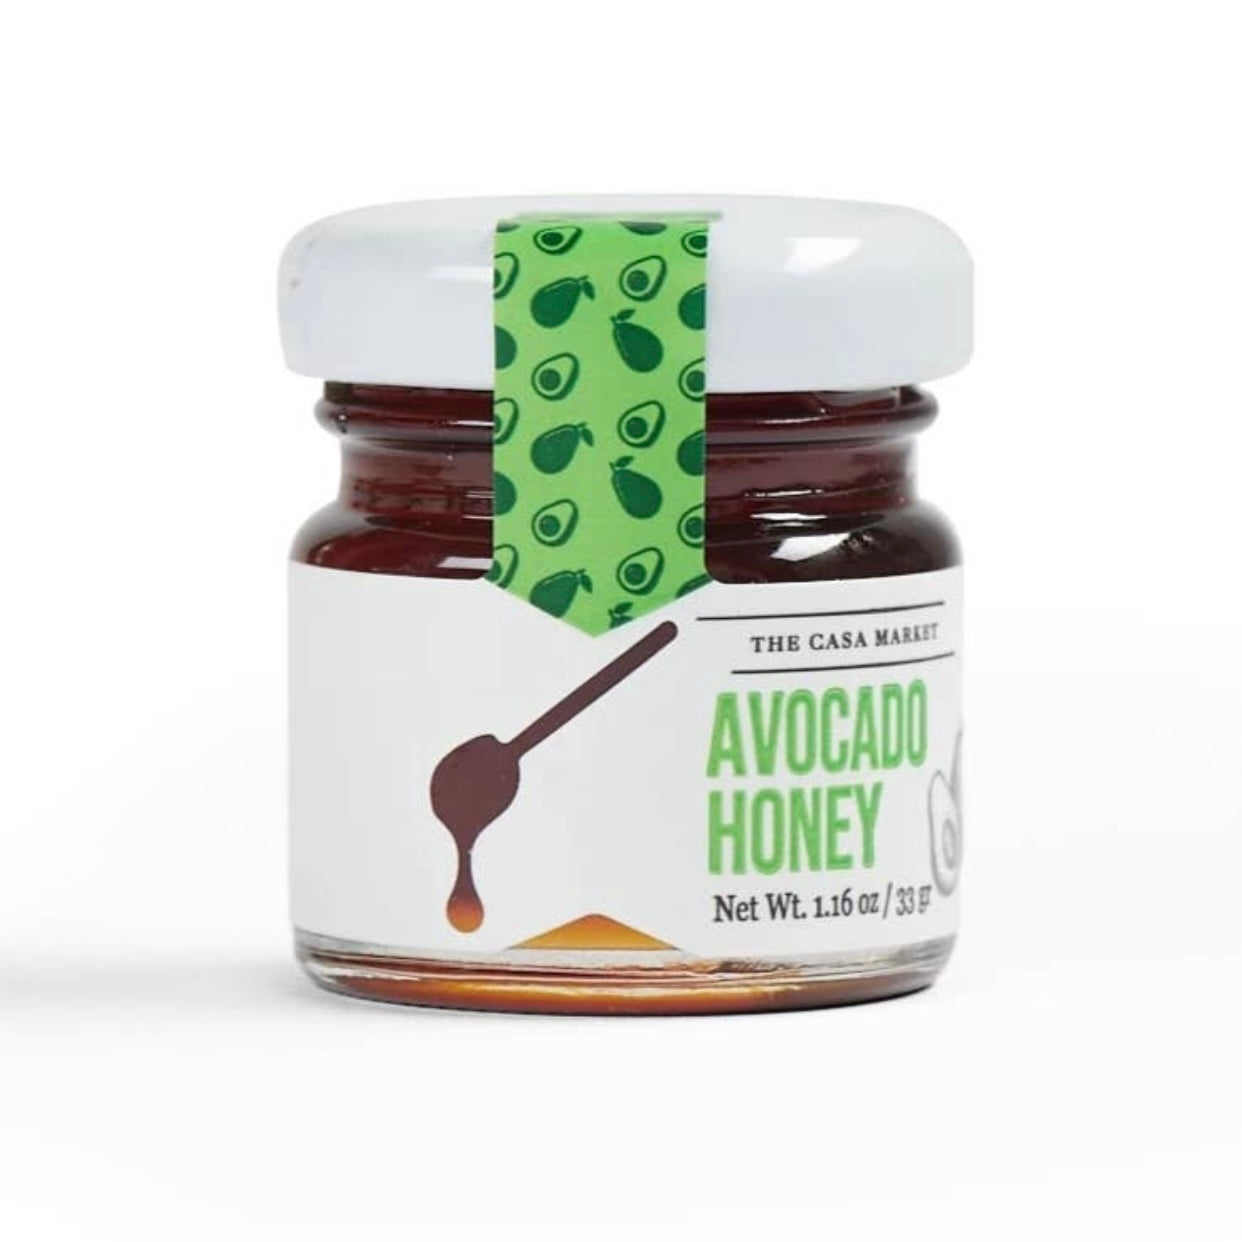 Mini Avocado Honey in an 1.16 ounce jar with a white branded label that features a honey dipper.